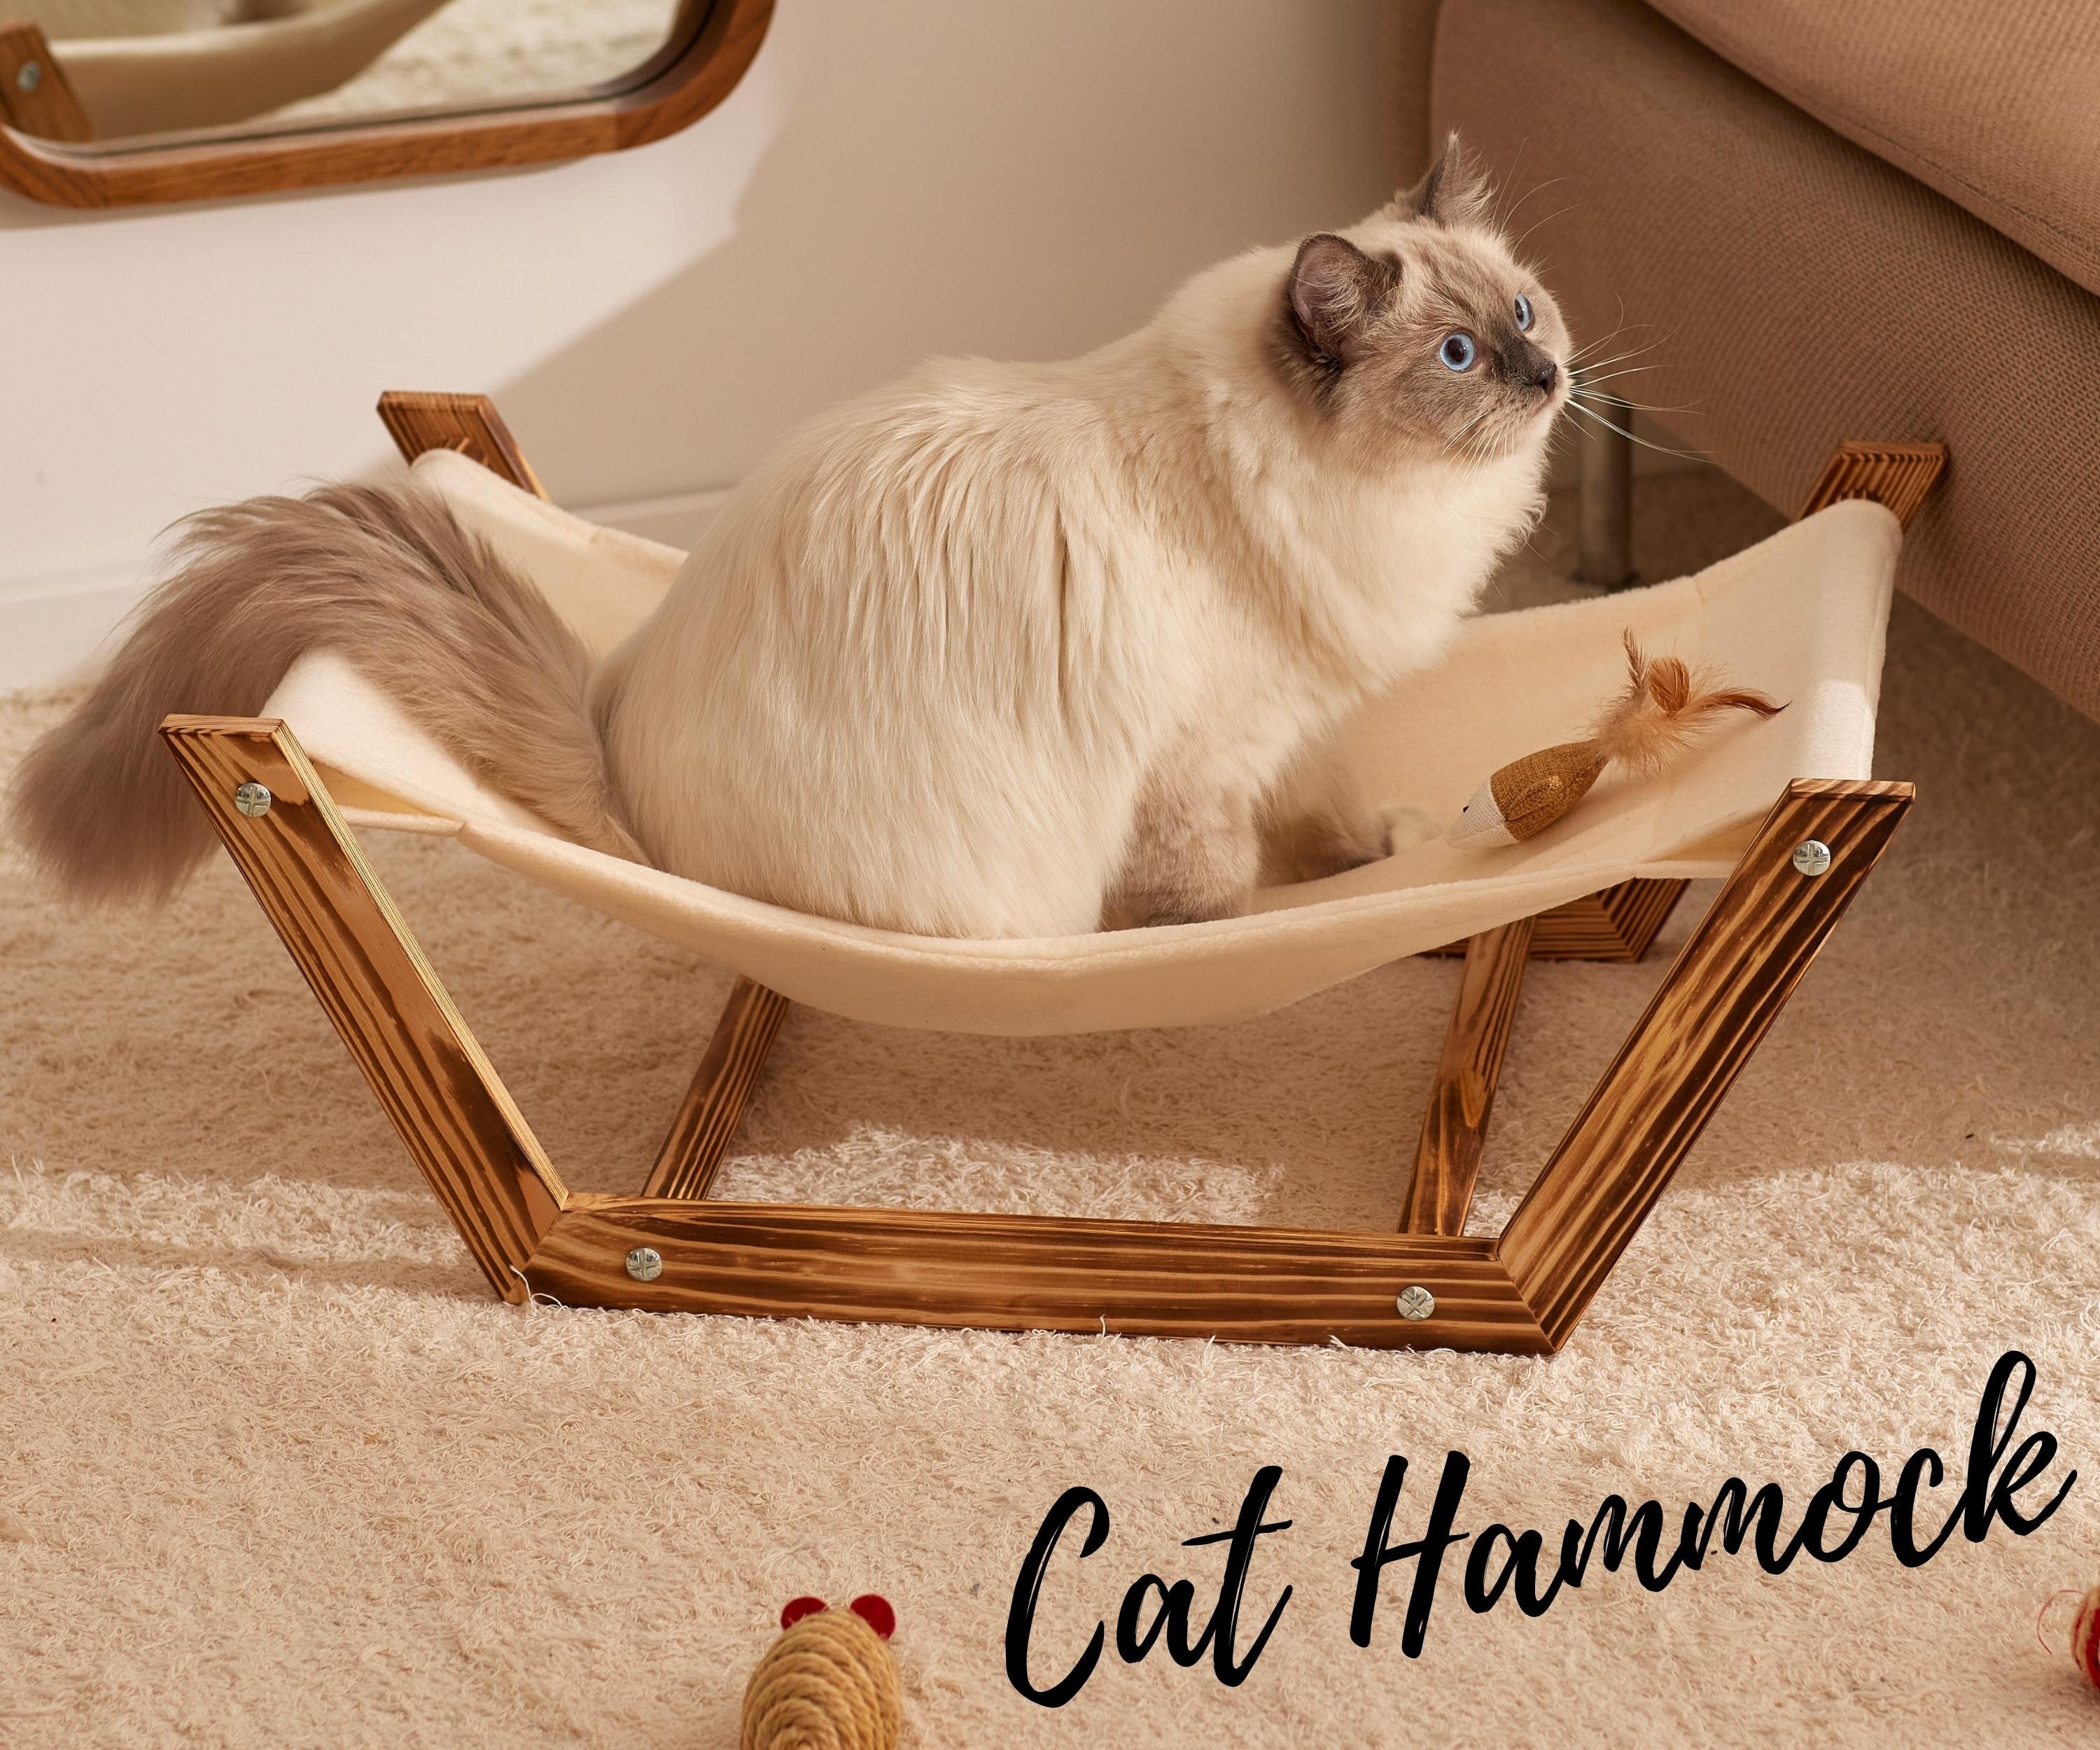 Ship from USA JKRED Wooden Base Cat Hammock Soft Plush Cat Bed Attractive and Sturdy Floor Pet Perch 